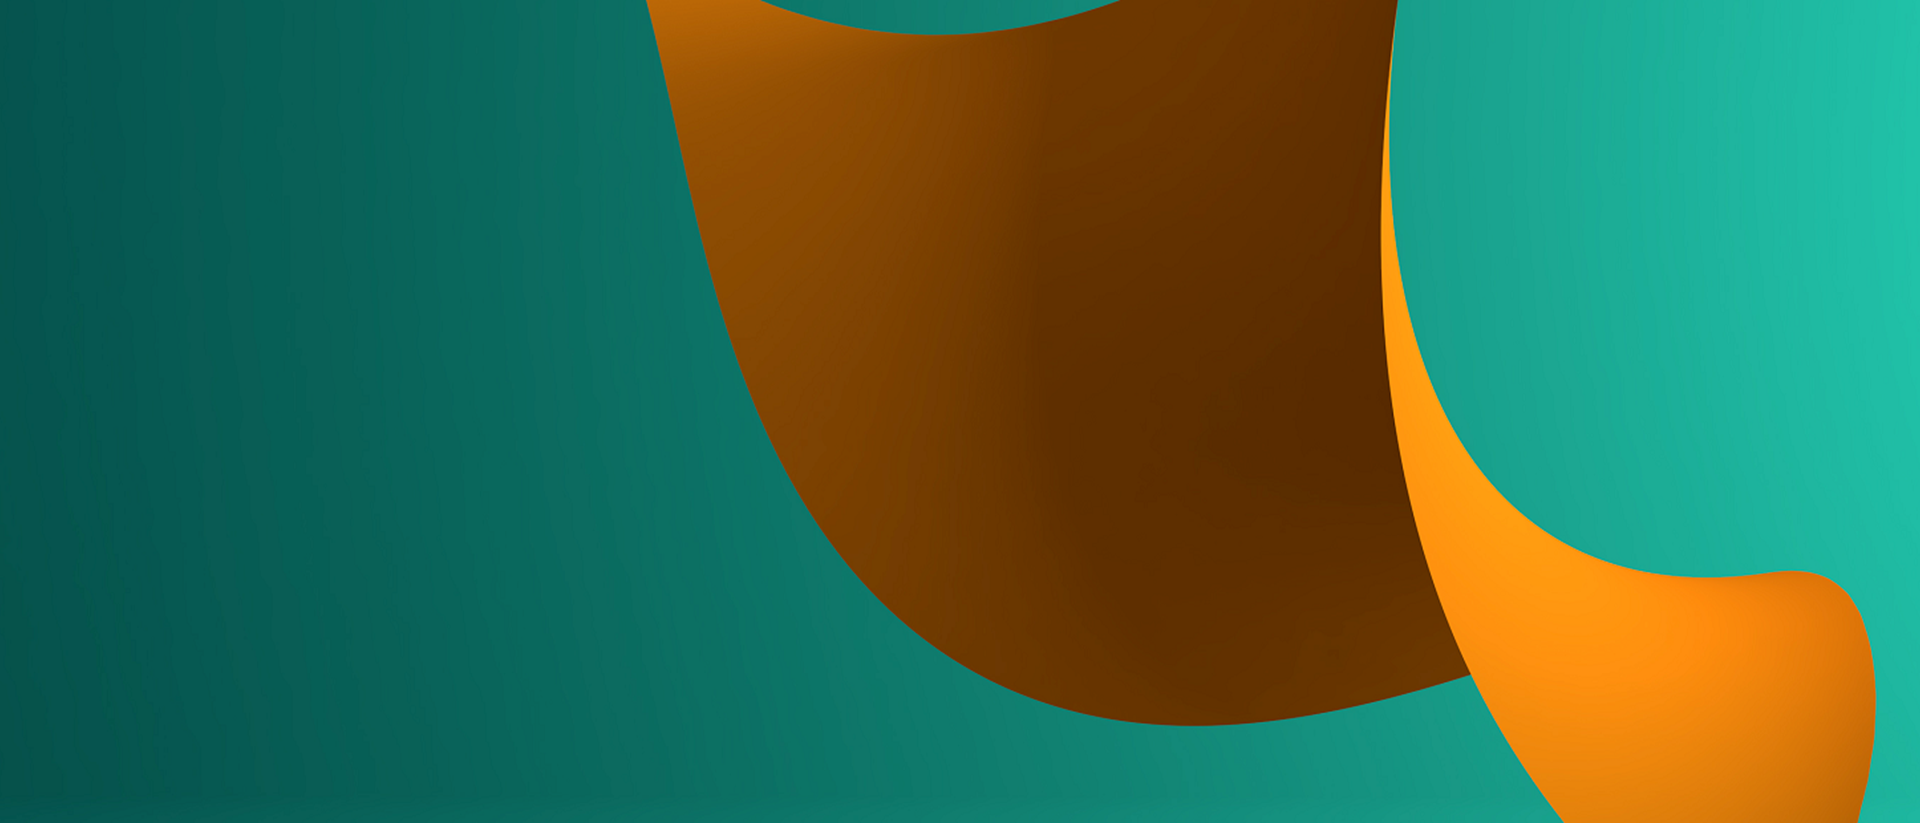 Hero image of one of 7IM's brand shapes in orange and teal